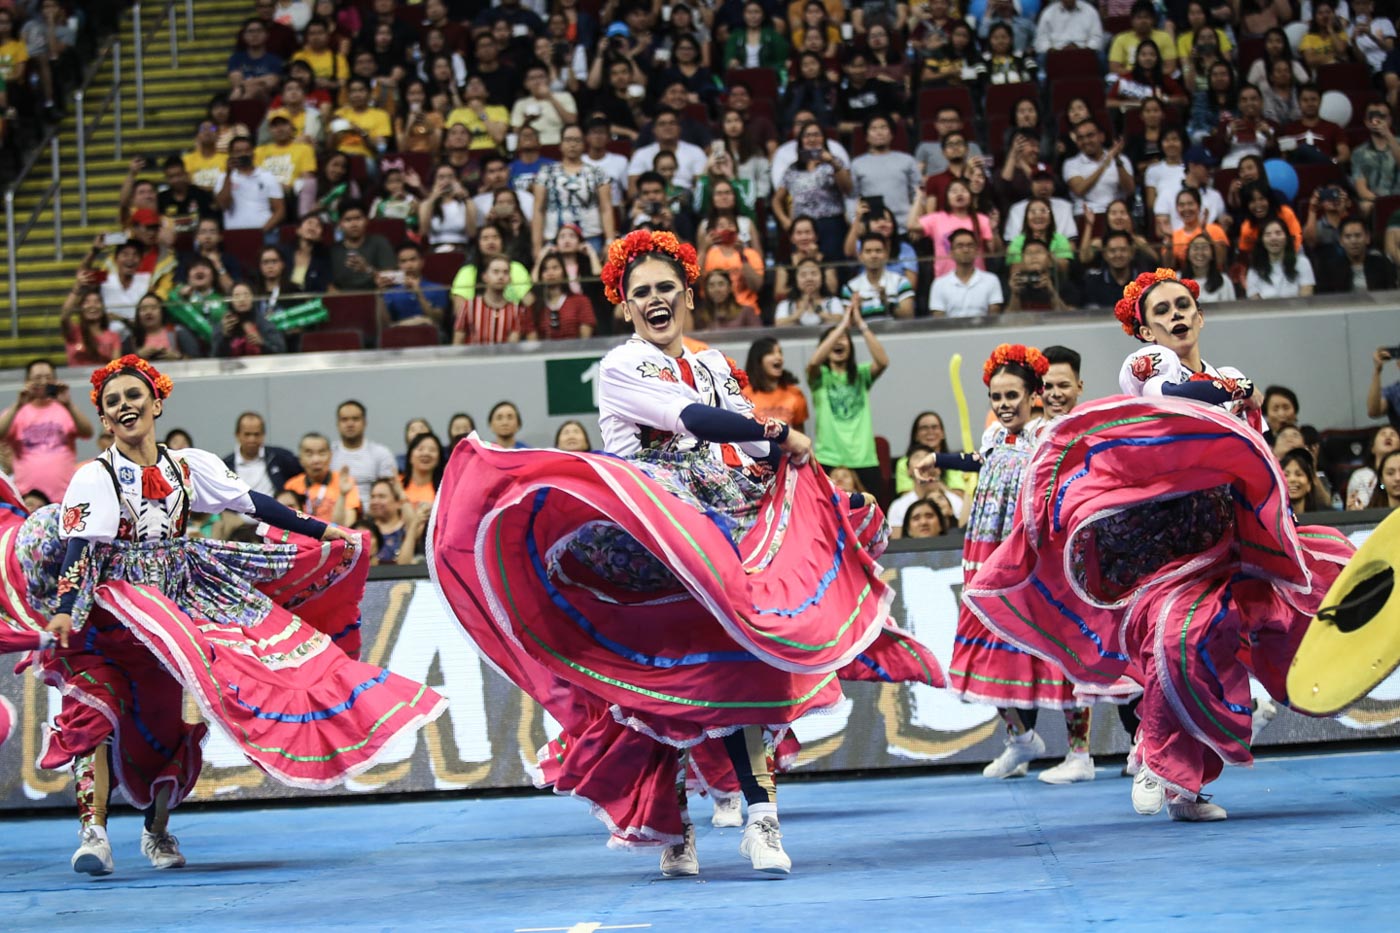 #VAMOSNationalU. The NU Pep Squad brings more life to its routine with the vibrant colors of Mexico. Photo by Josh Albelda/Rappler  